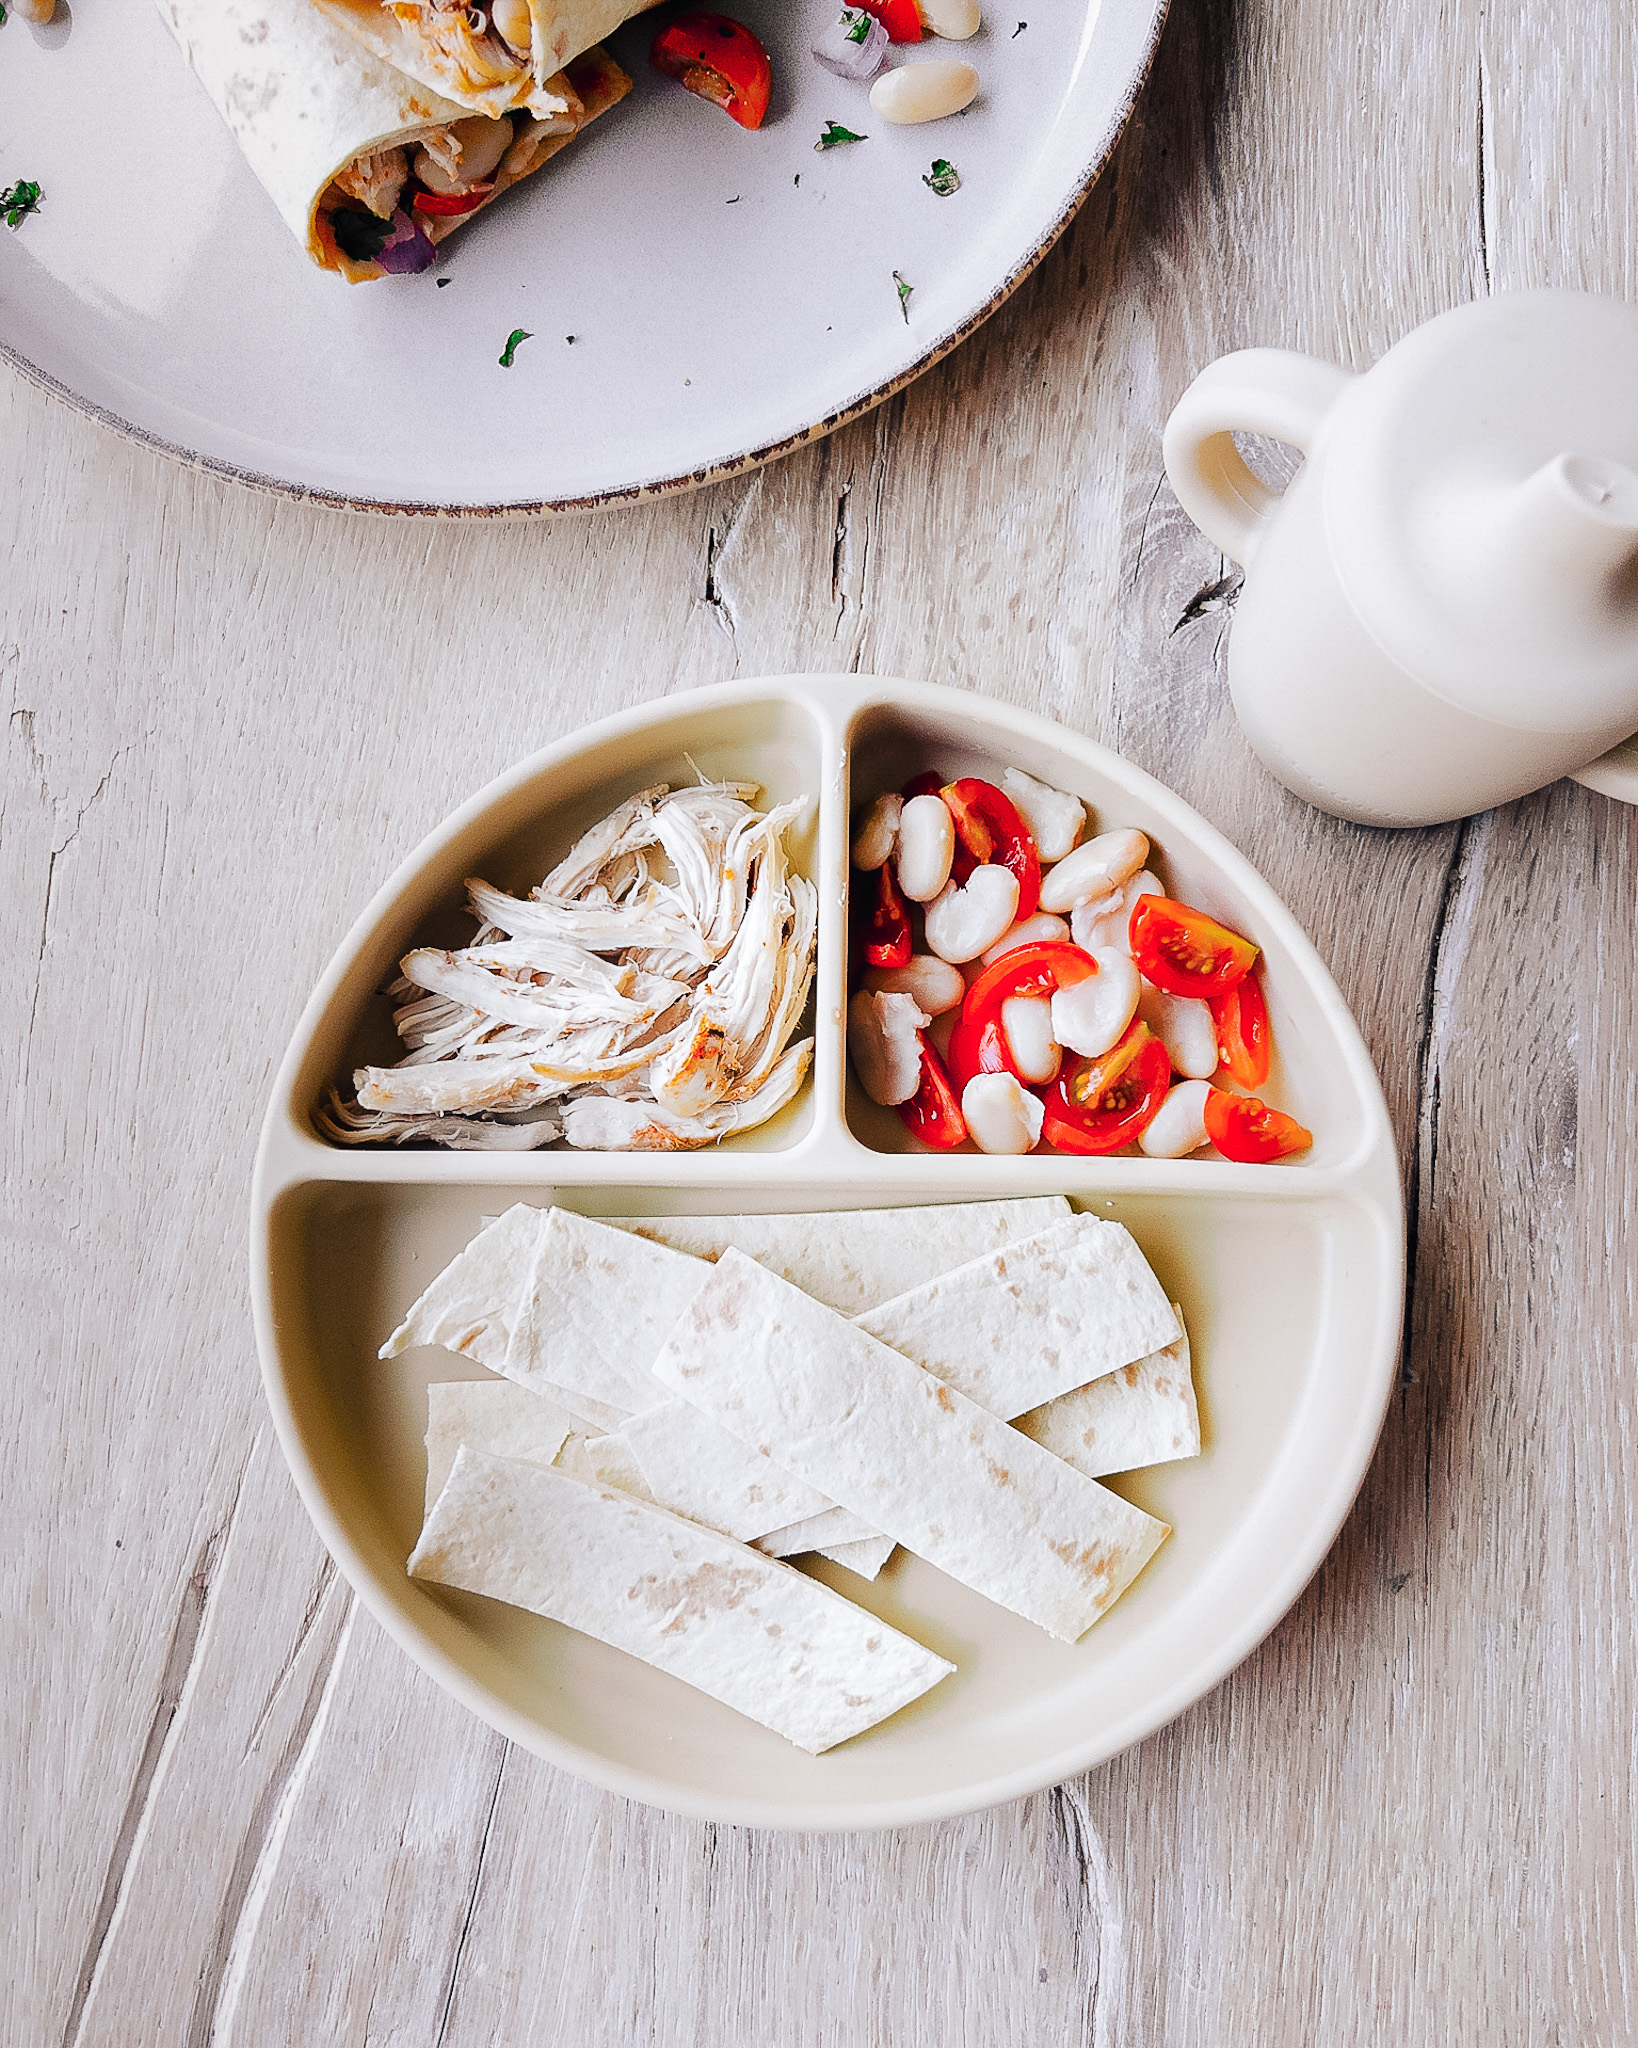 Family meals suitable for baby led weaning - wraps